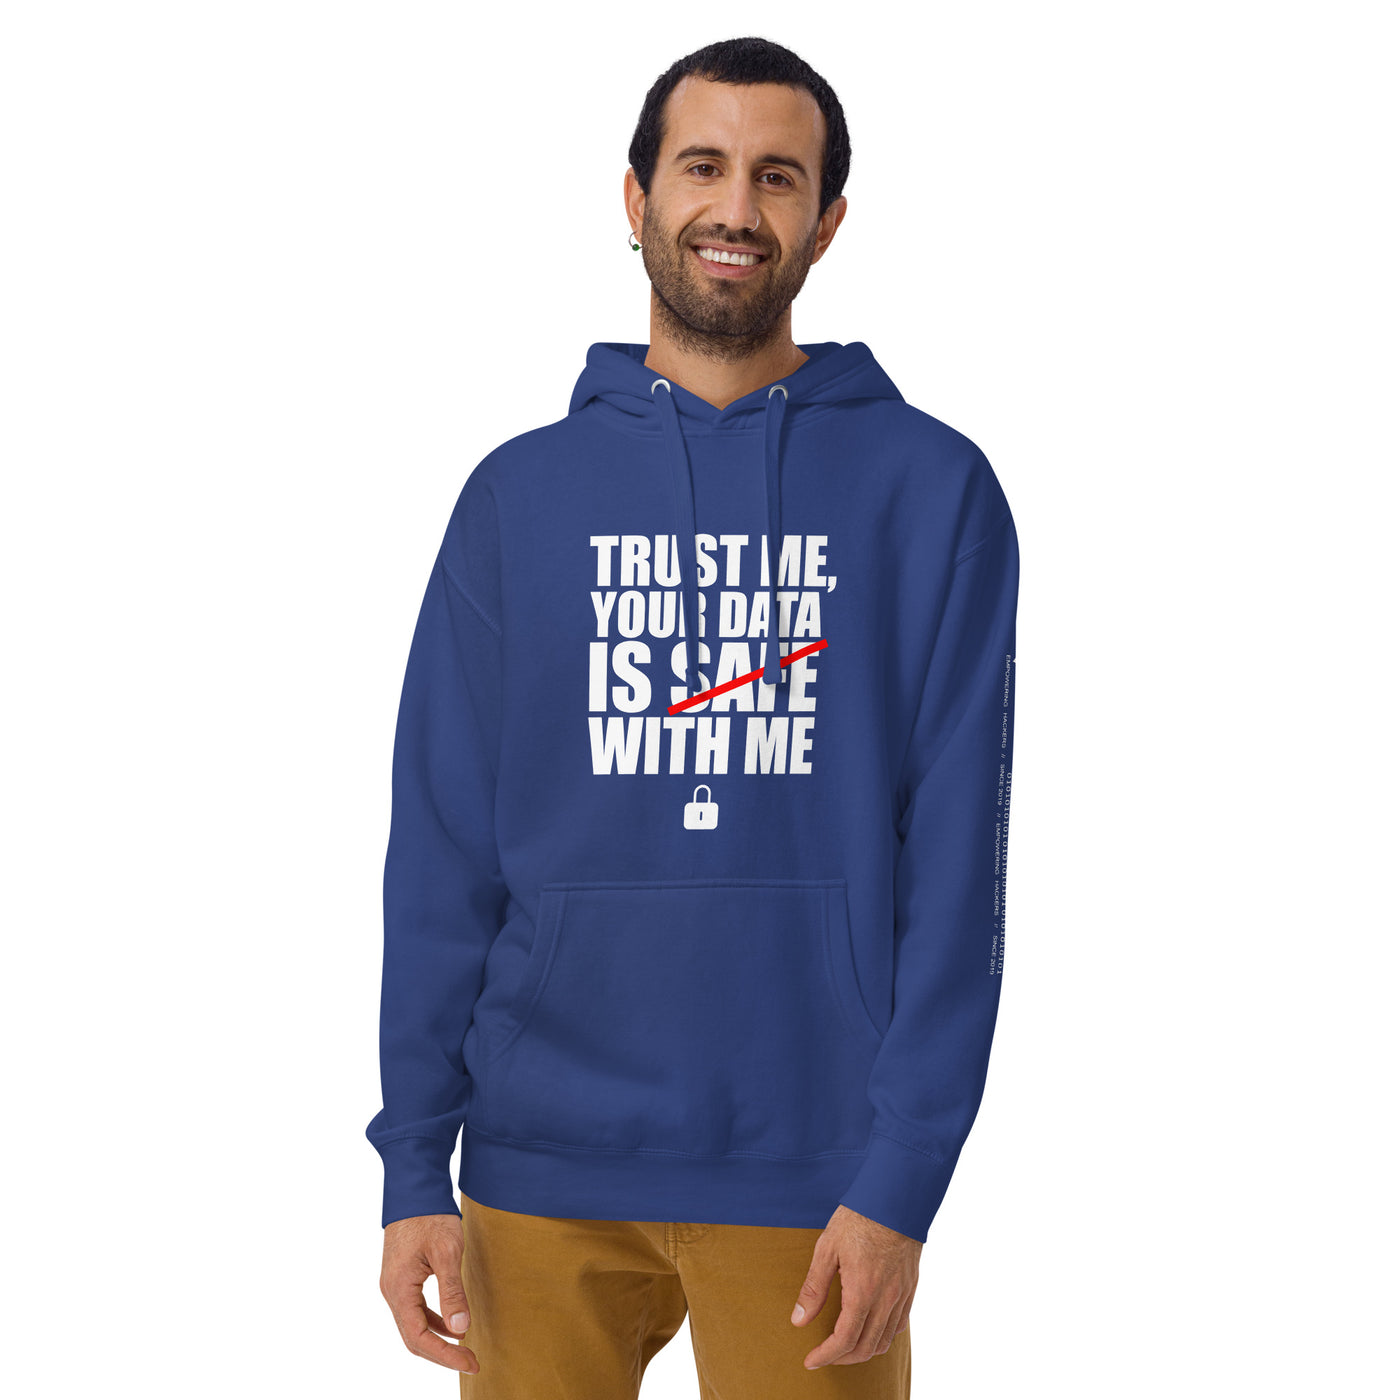 Trust me, your data is safe with me - Unisex Hoodie